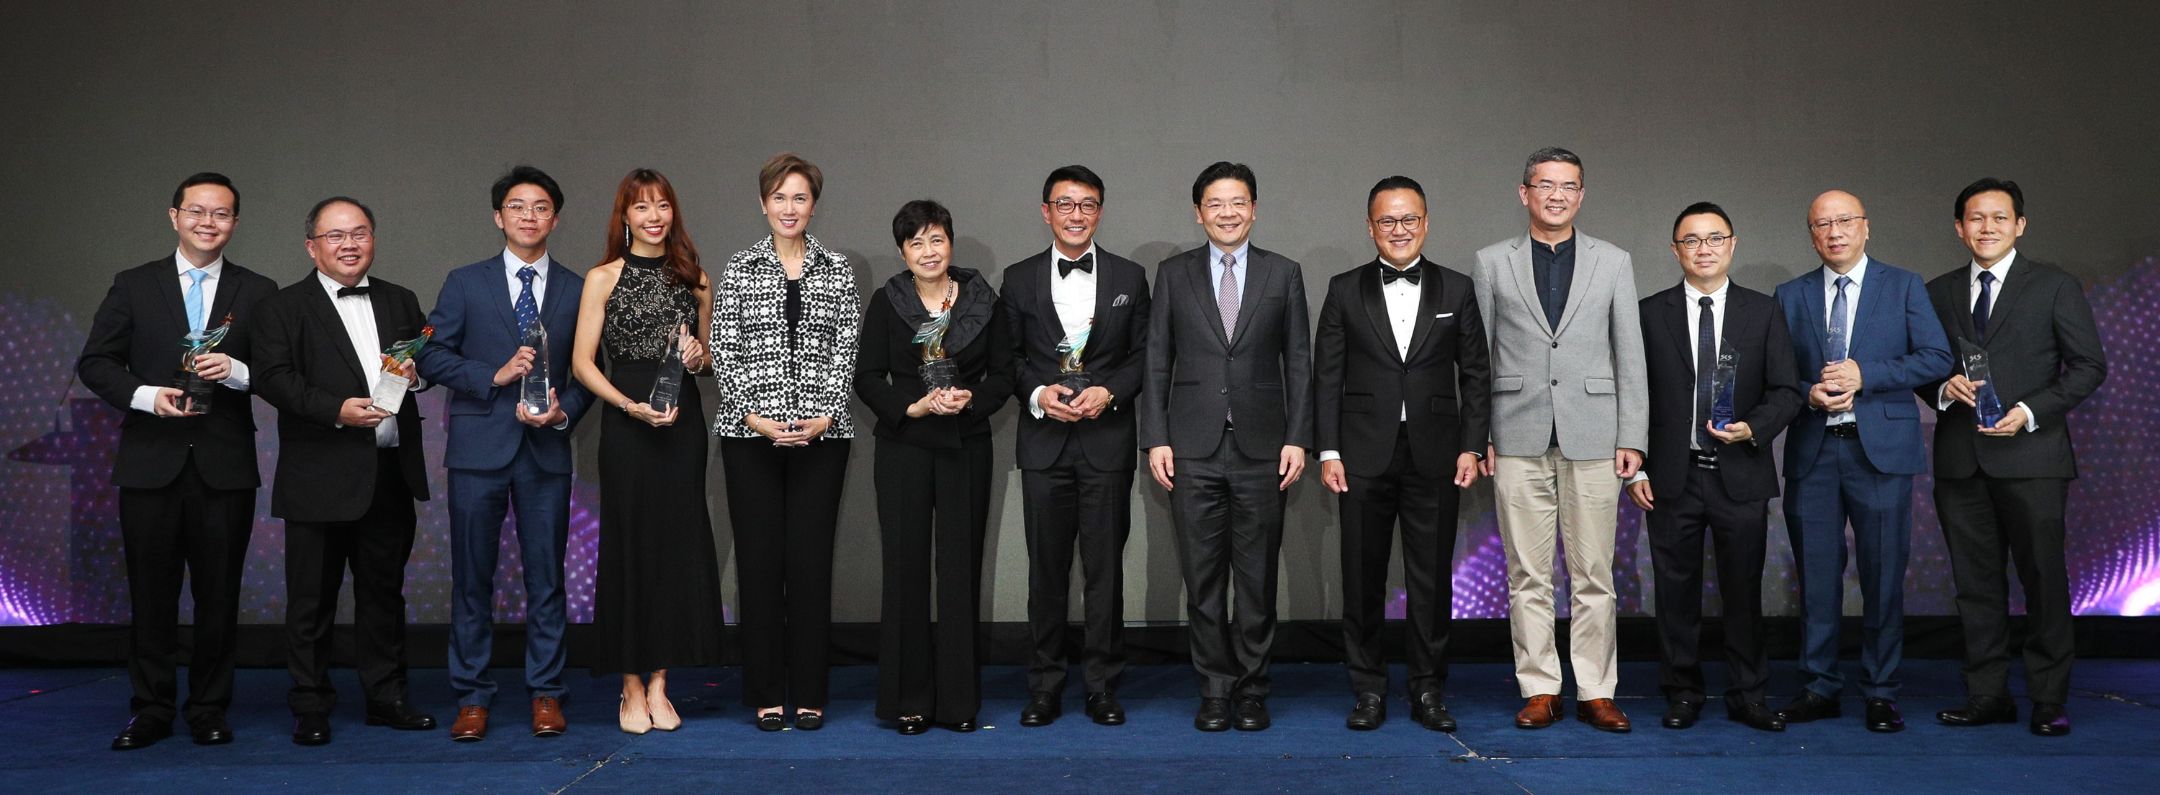 DPM Wong at SCS 55th Anniversary Dinner and Tech Leader Awards_Hero jpg